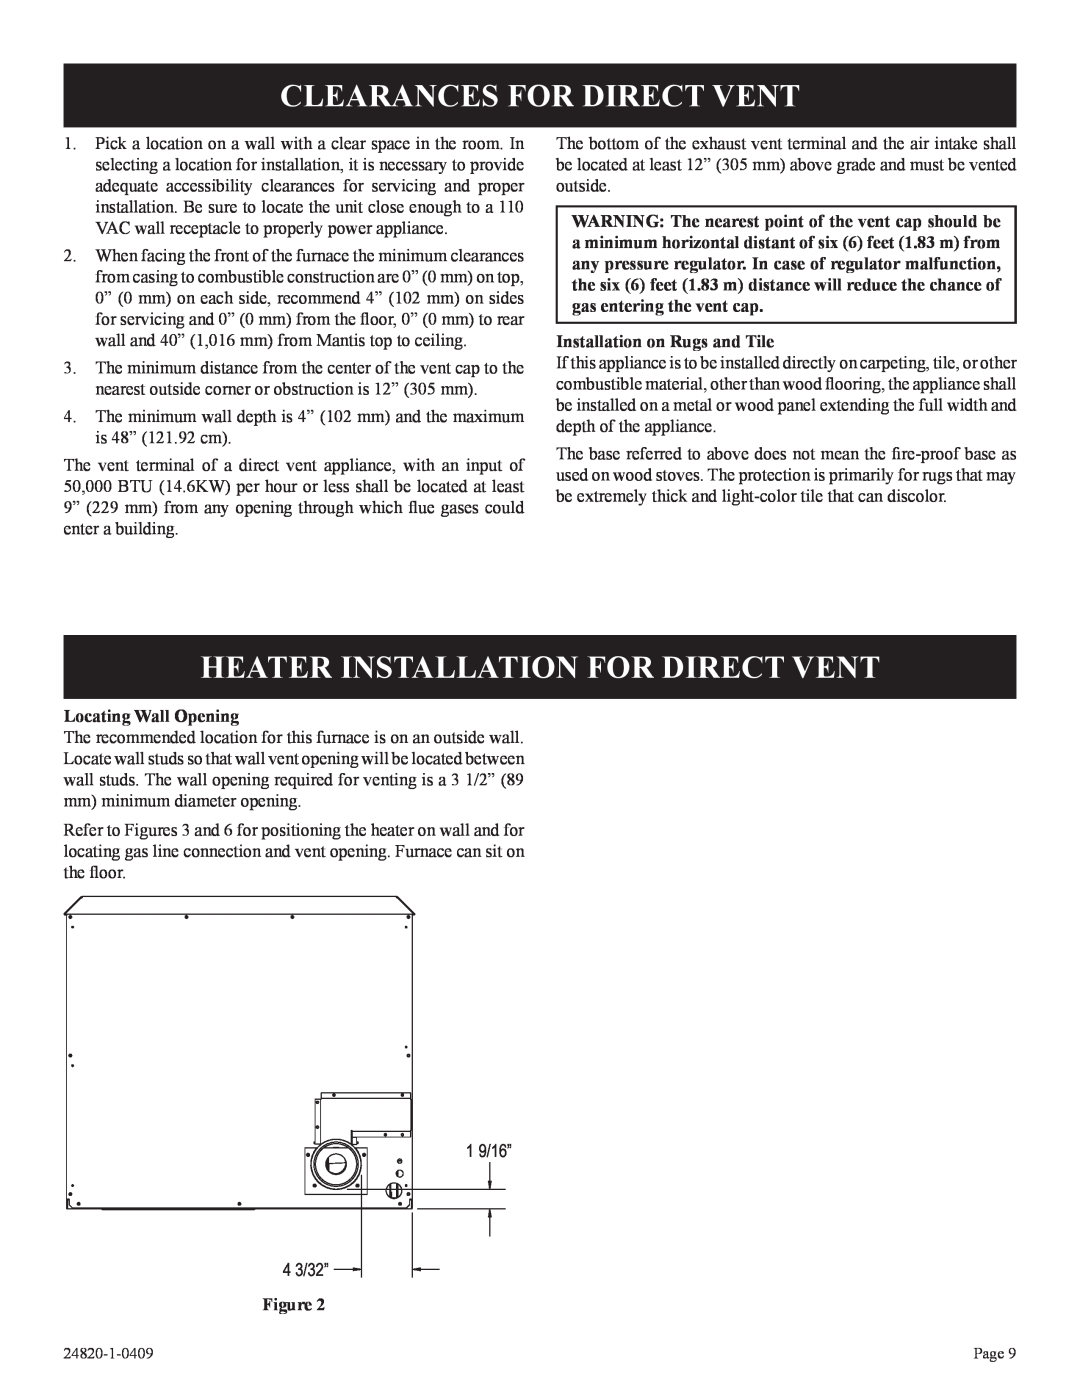 Empire Comfort Systems PV-28SV50-B(N,P)-1 Clearances For Direct Vent, Heater Installation For Direct Vent 